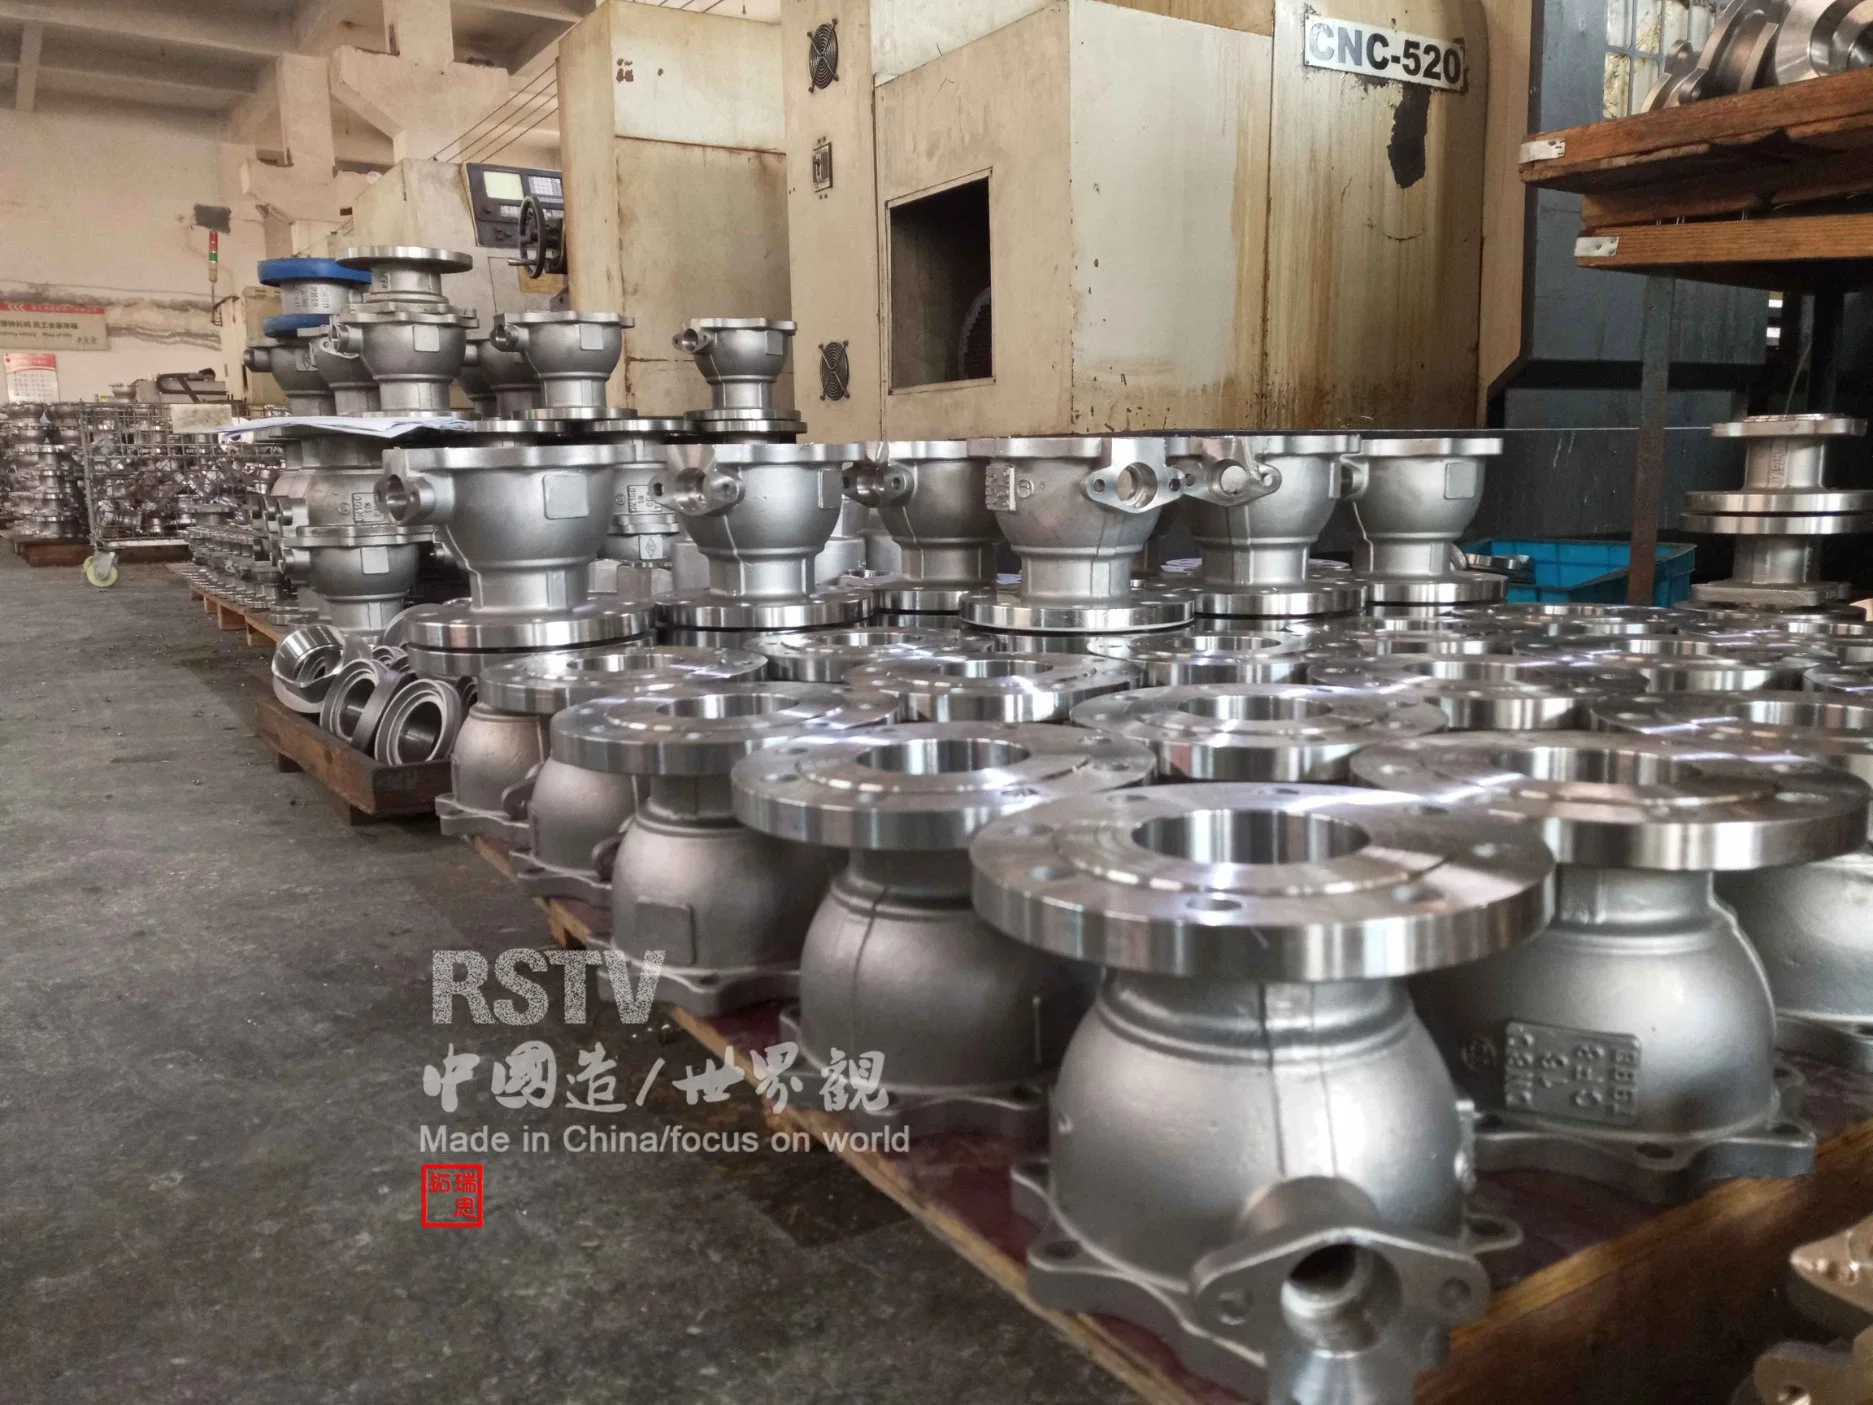 2PC Flange End Ball Valve, DIN Standard Pn16, with High Platform, Stainless Steel 304/316/Wcb Material. 2205 Is Workable, High quality/High cost performance , Good Looking